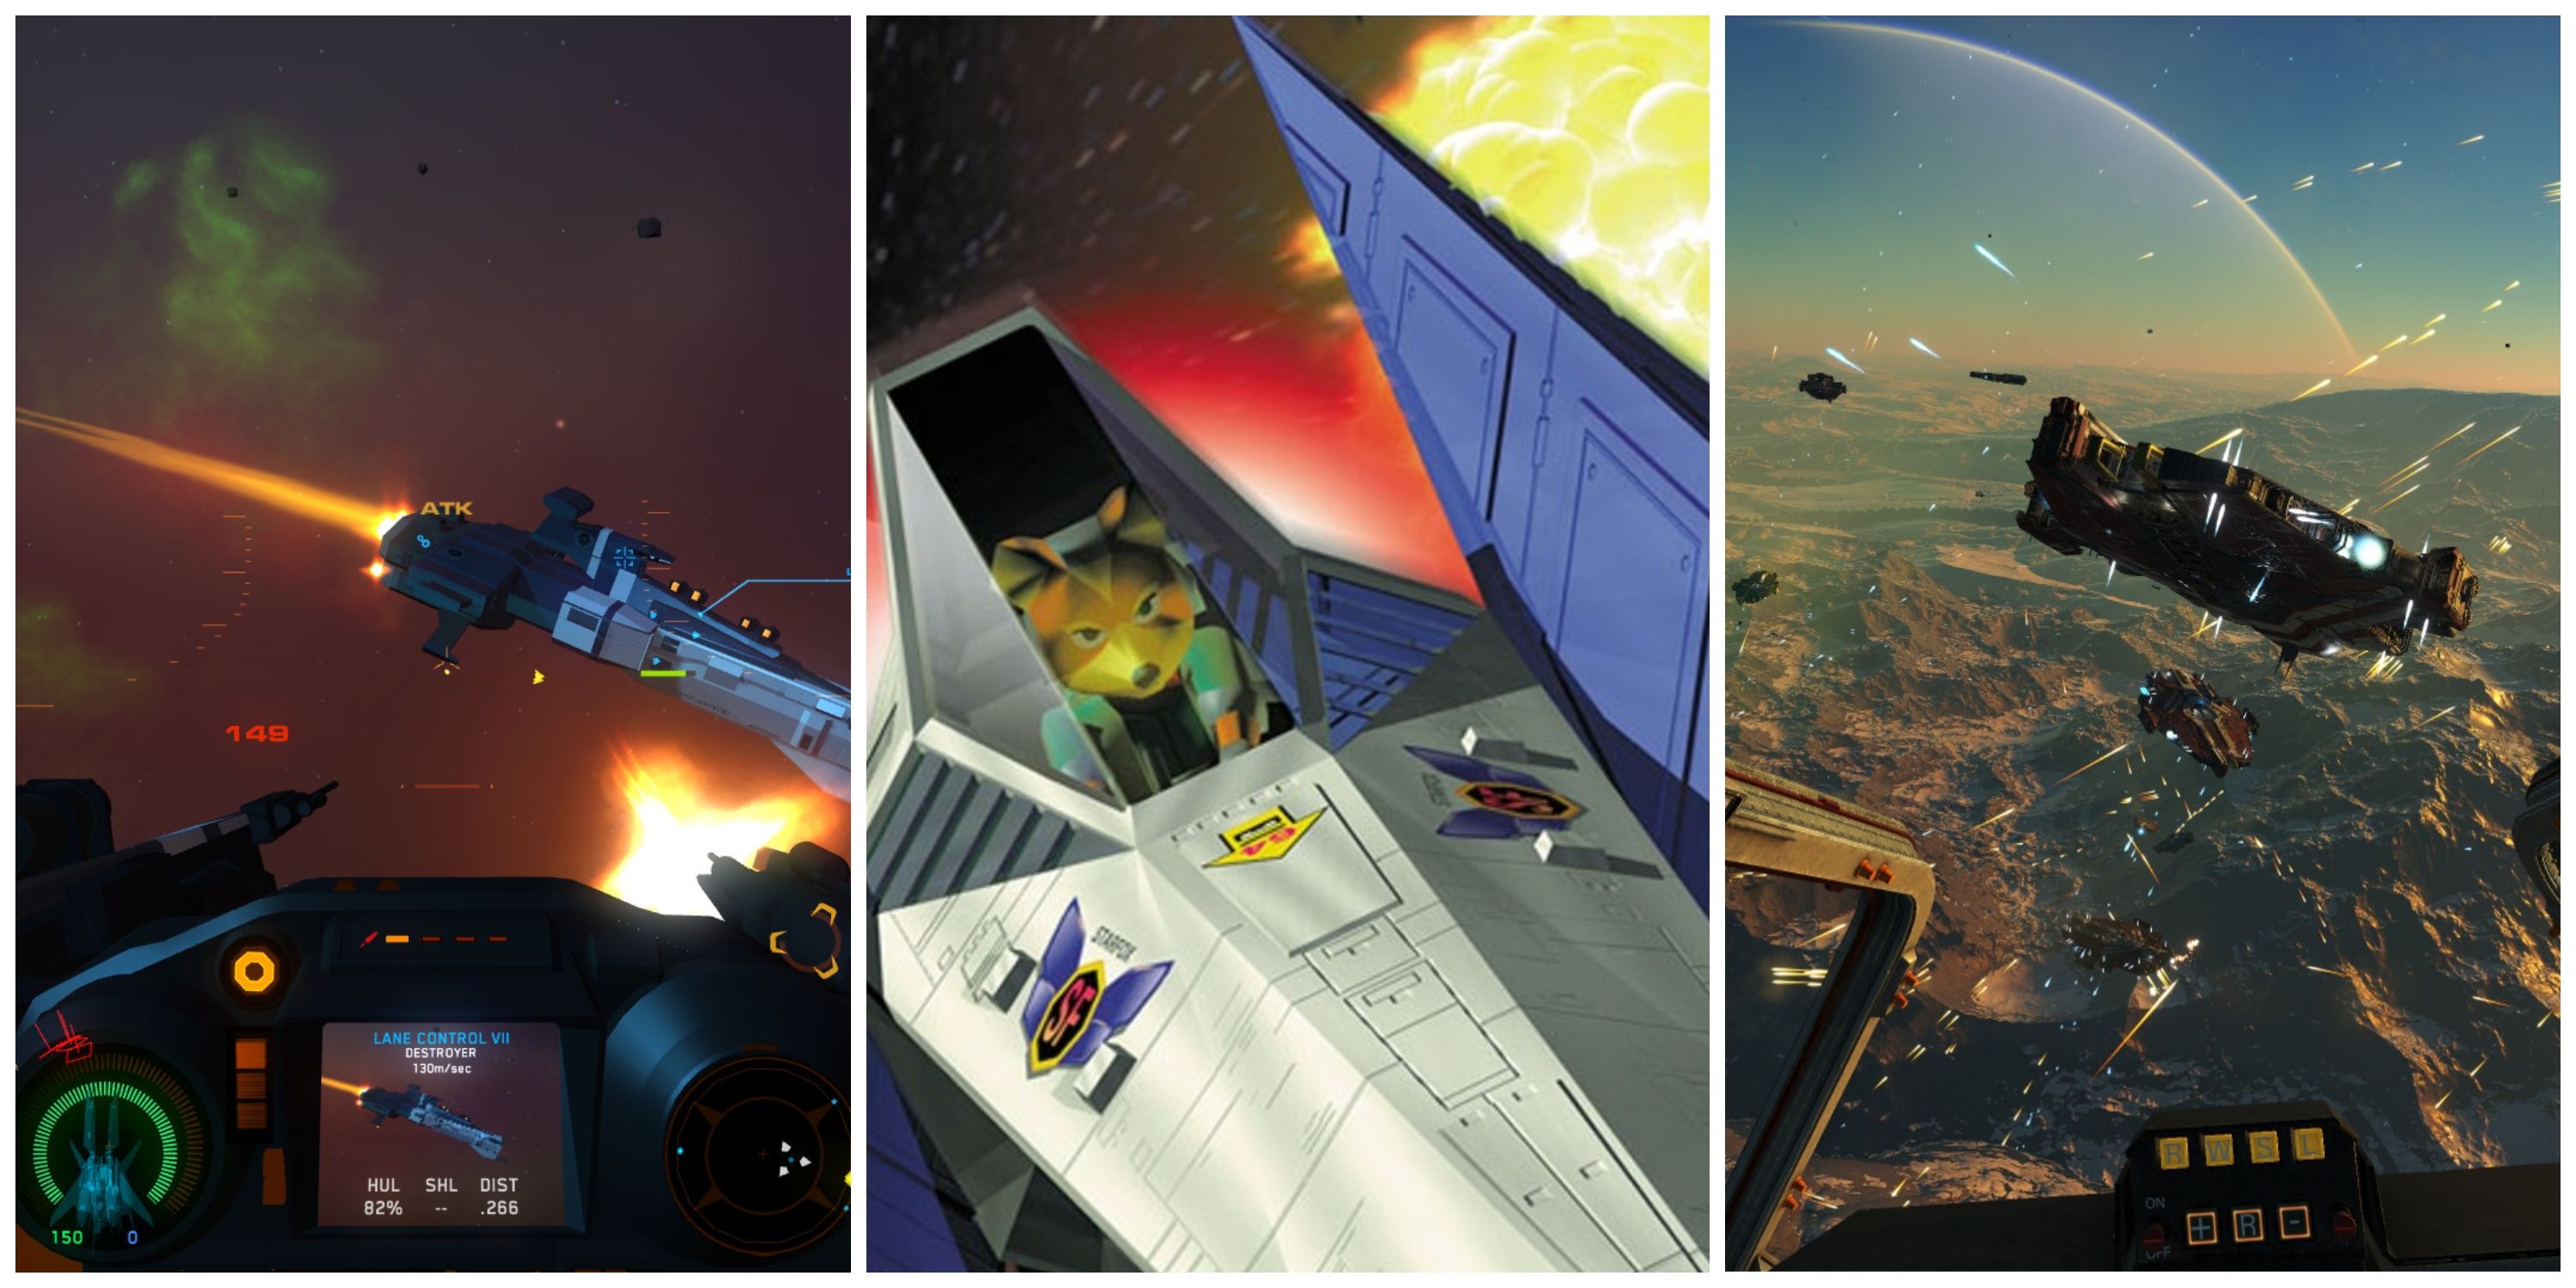 Sci-Fi Games With The Best Space Combat (Featured Image) - The House Of The Dying Sun + Star Fox 64 + Infinity: Battlescape